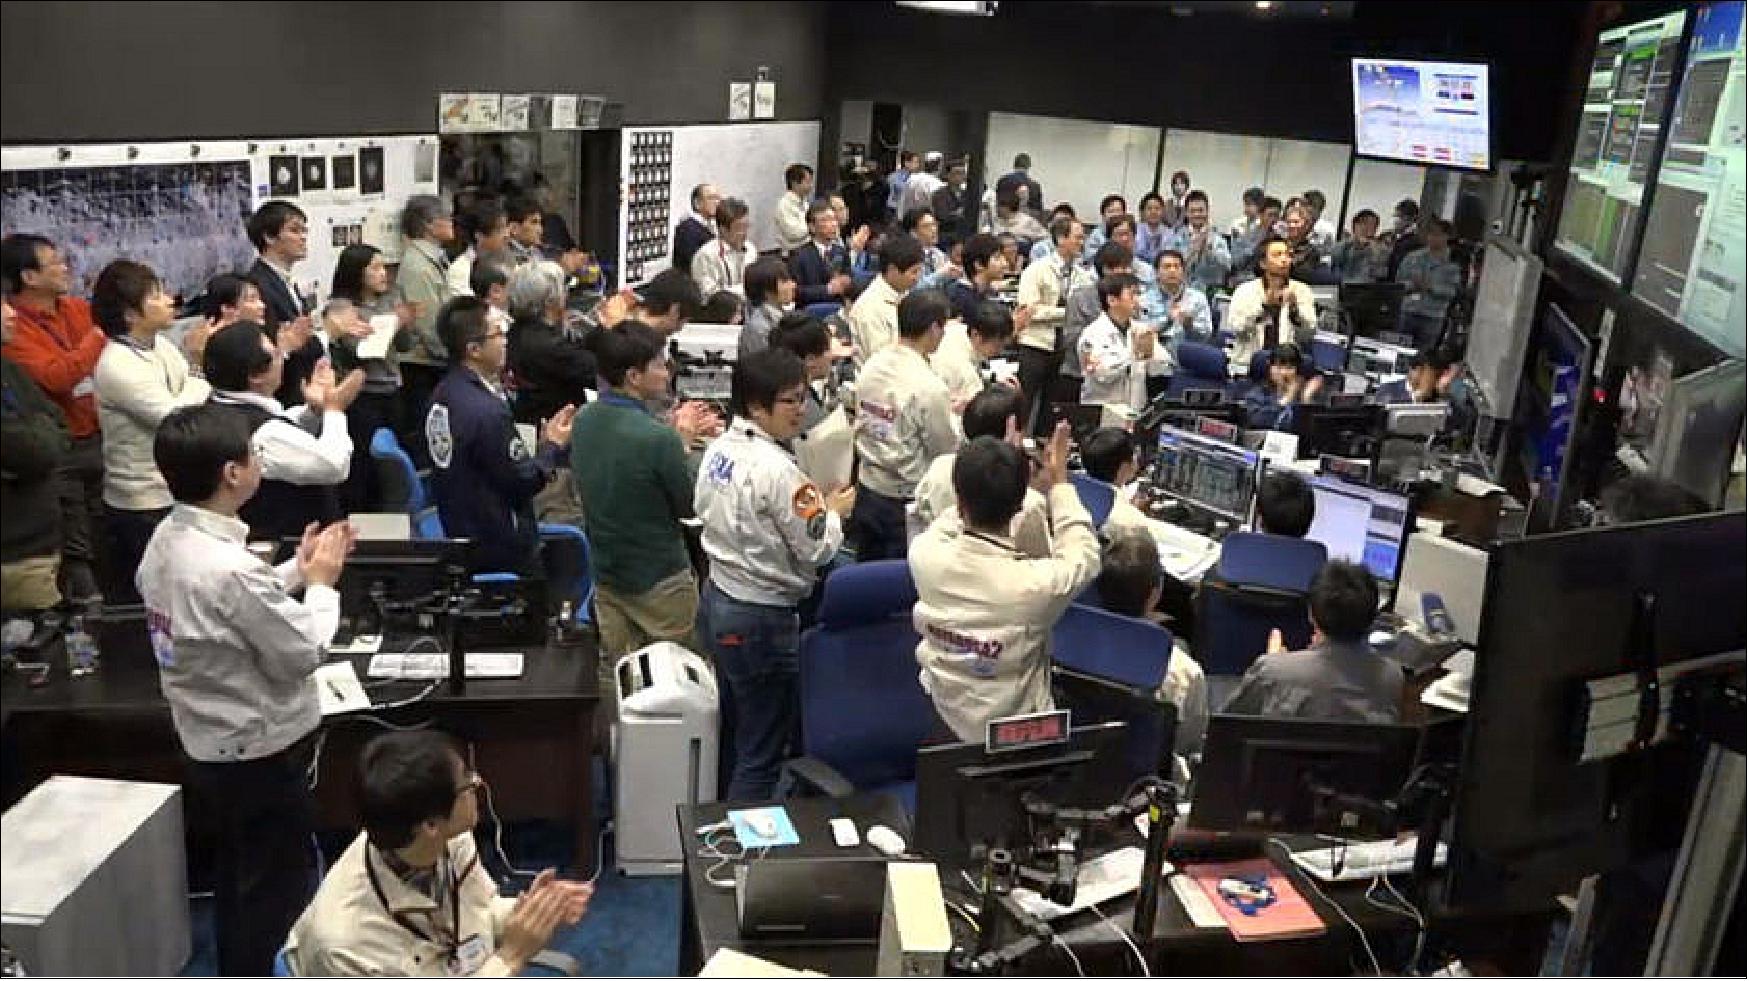 Figure 65: Celebration in Hayabusa-2 mission control room after successful touchdown on Ryugu. A packed control room celebrates a subtle shift in Hayabusa-2's radio signal, marking the moment of its touchdown and sample grab on Ryugu on 21 February 2019 at 22:49 UTC (image credit: JAXA)